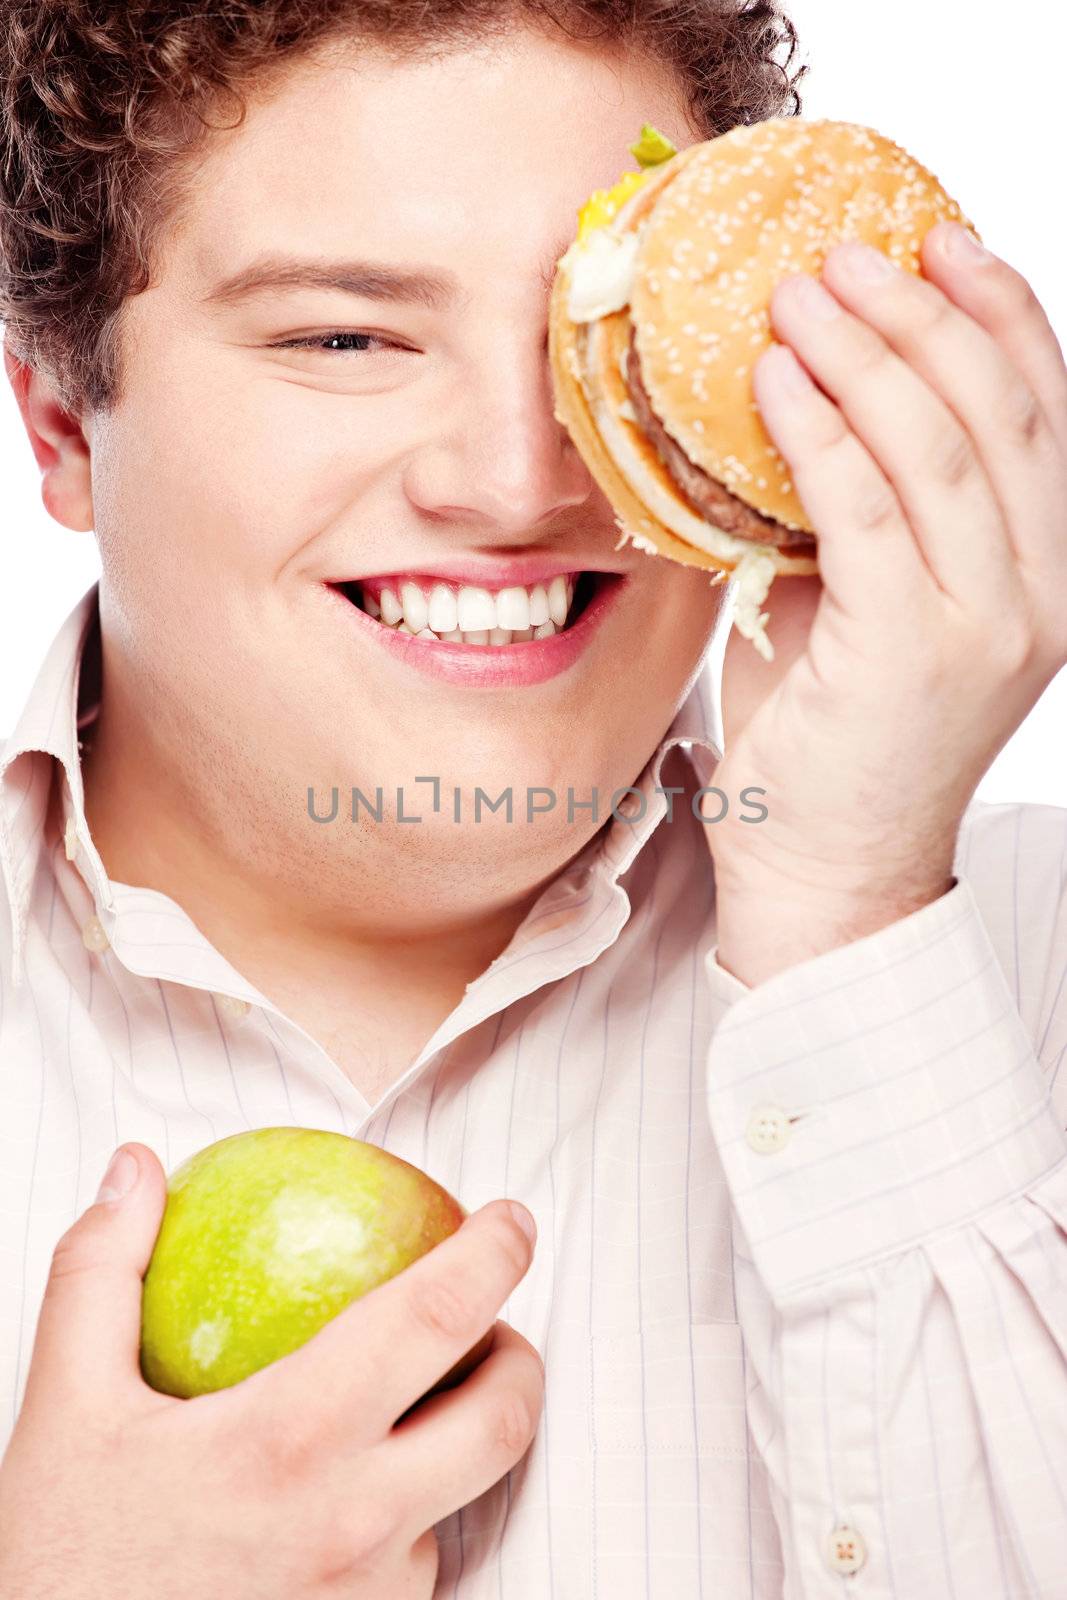 Young chubby man holding apple and hamburger, isolated on white